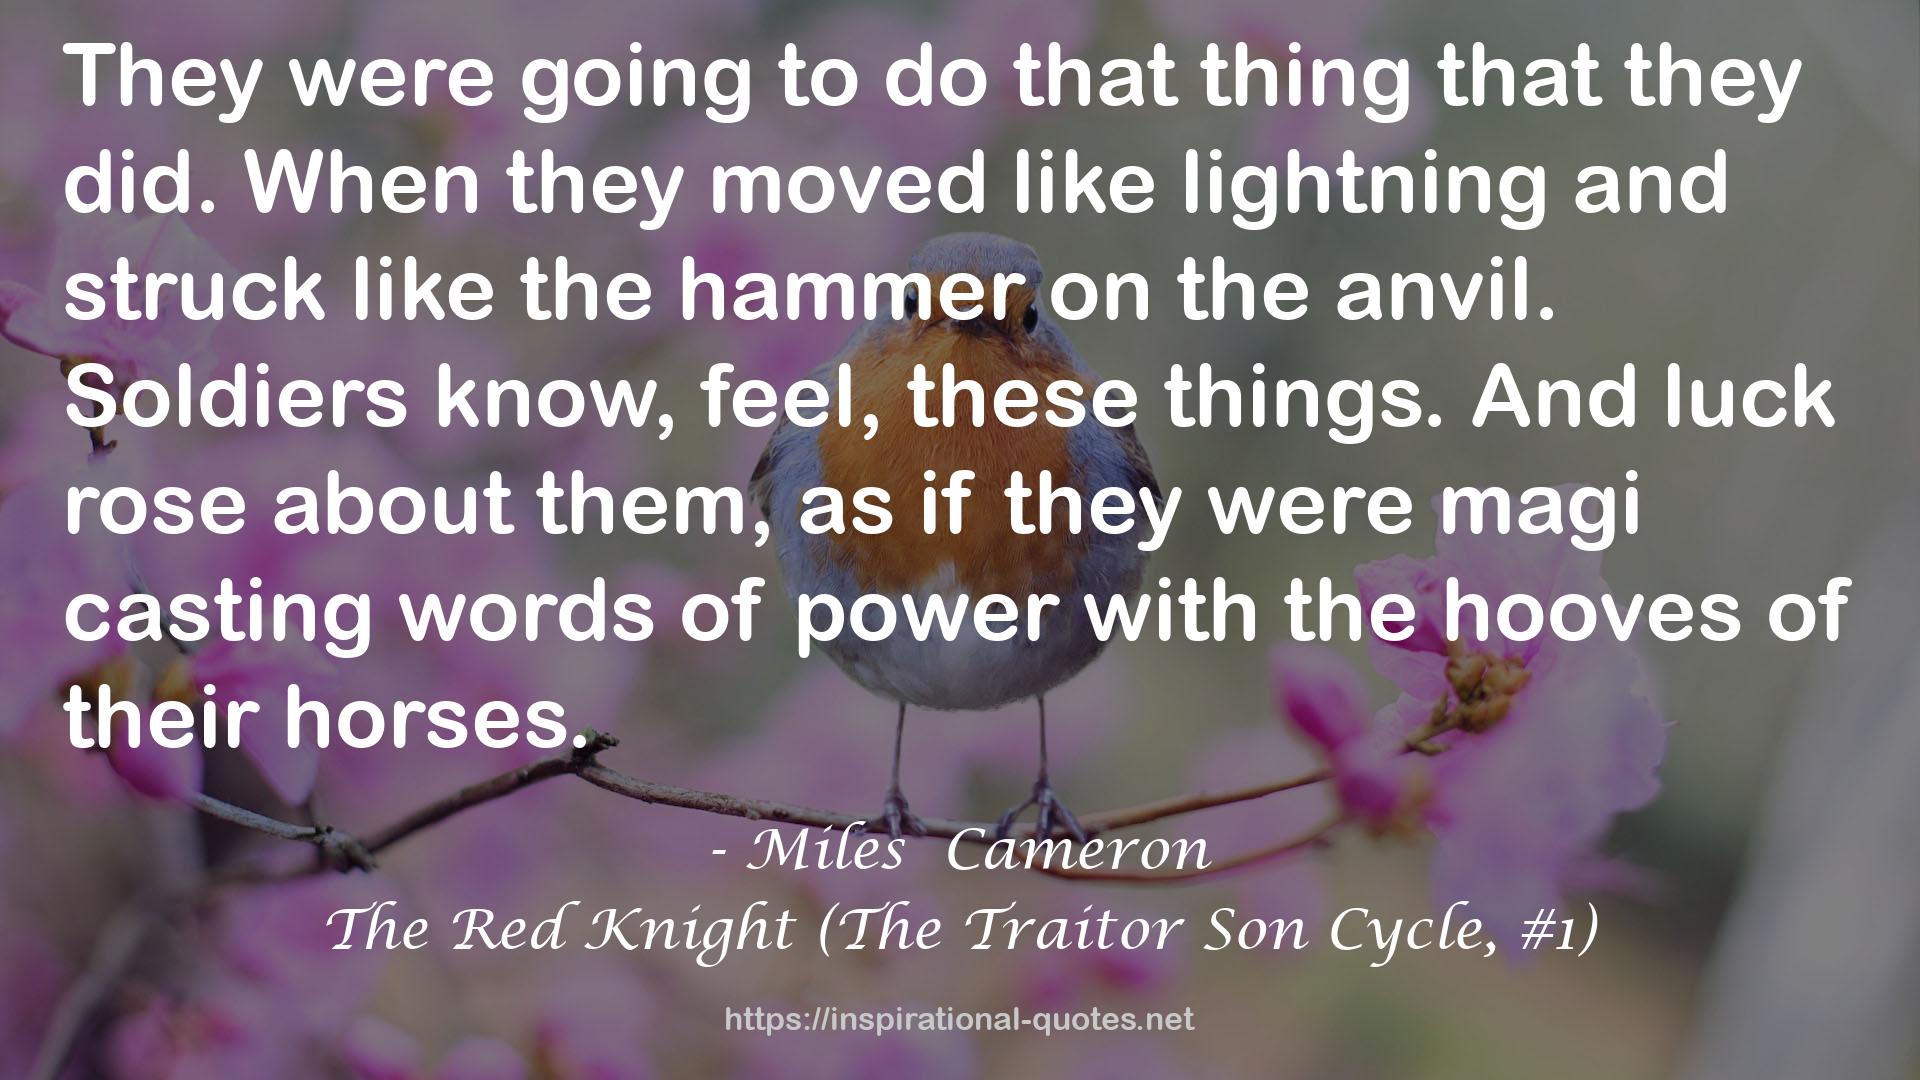 The Red Knight (The Traitor Son Cycle, #1) QUOTES